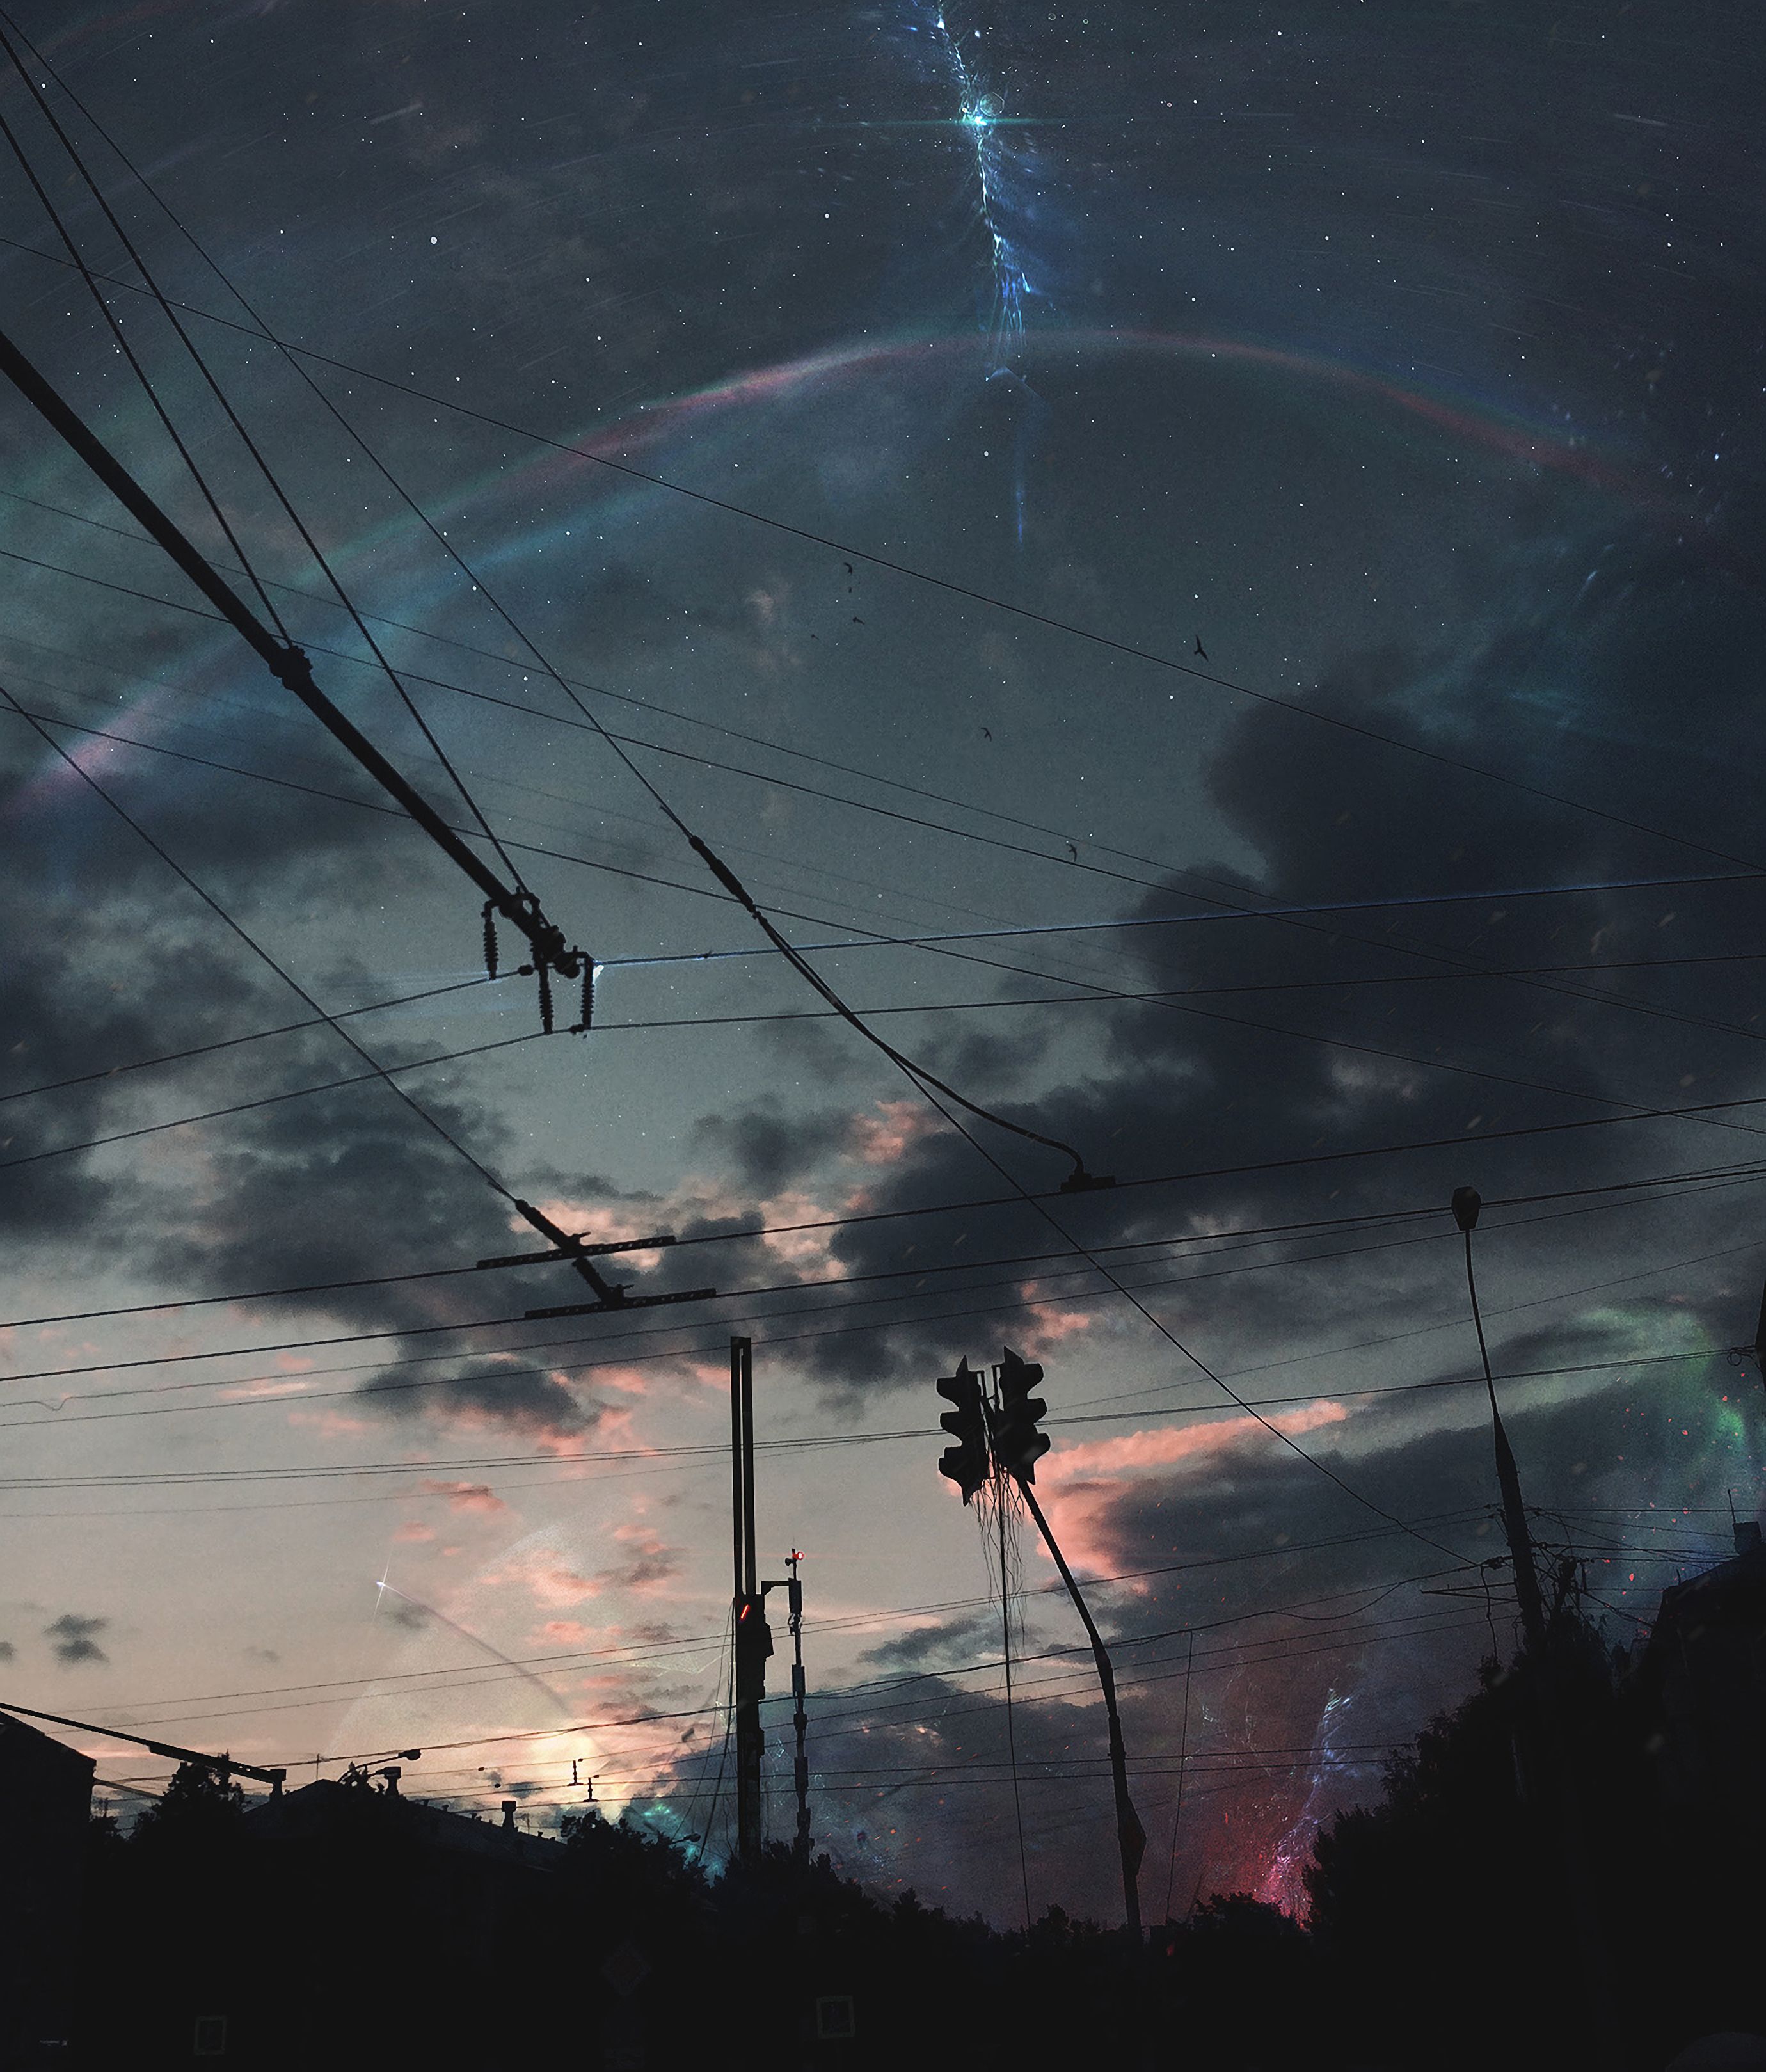 art, sky, wires, night, clouds, wire High Definition image